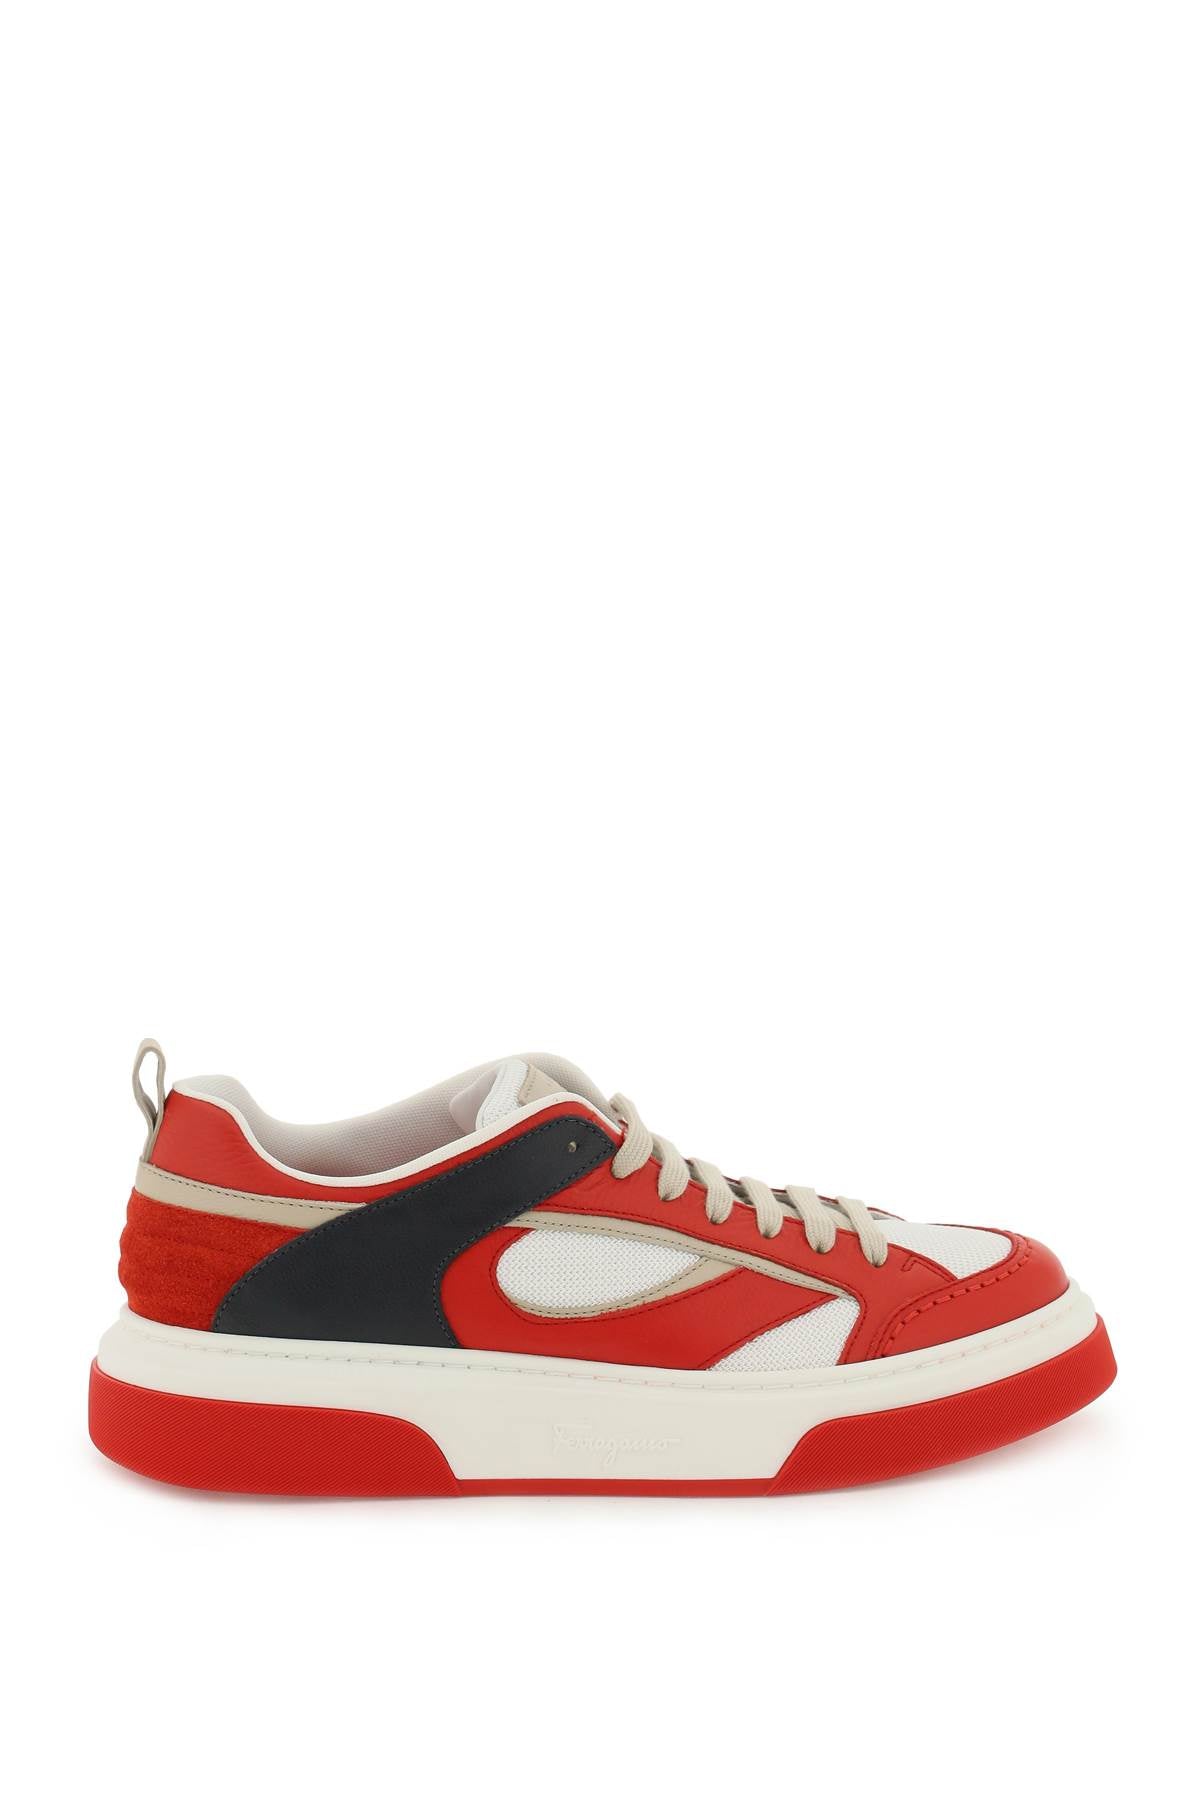 FERRAGAMO Men's Leather and Fabric Sneaker with Contrasting Inserts